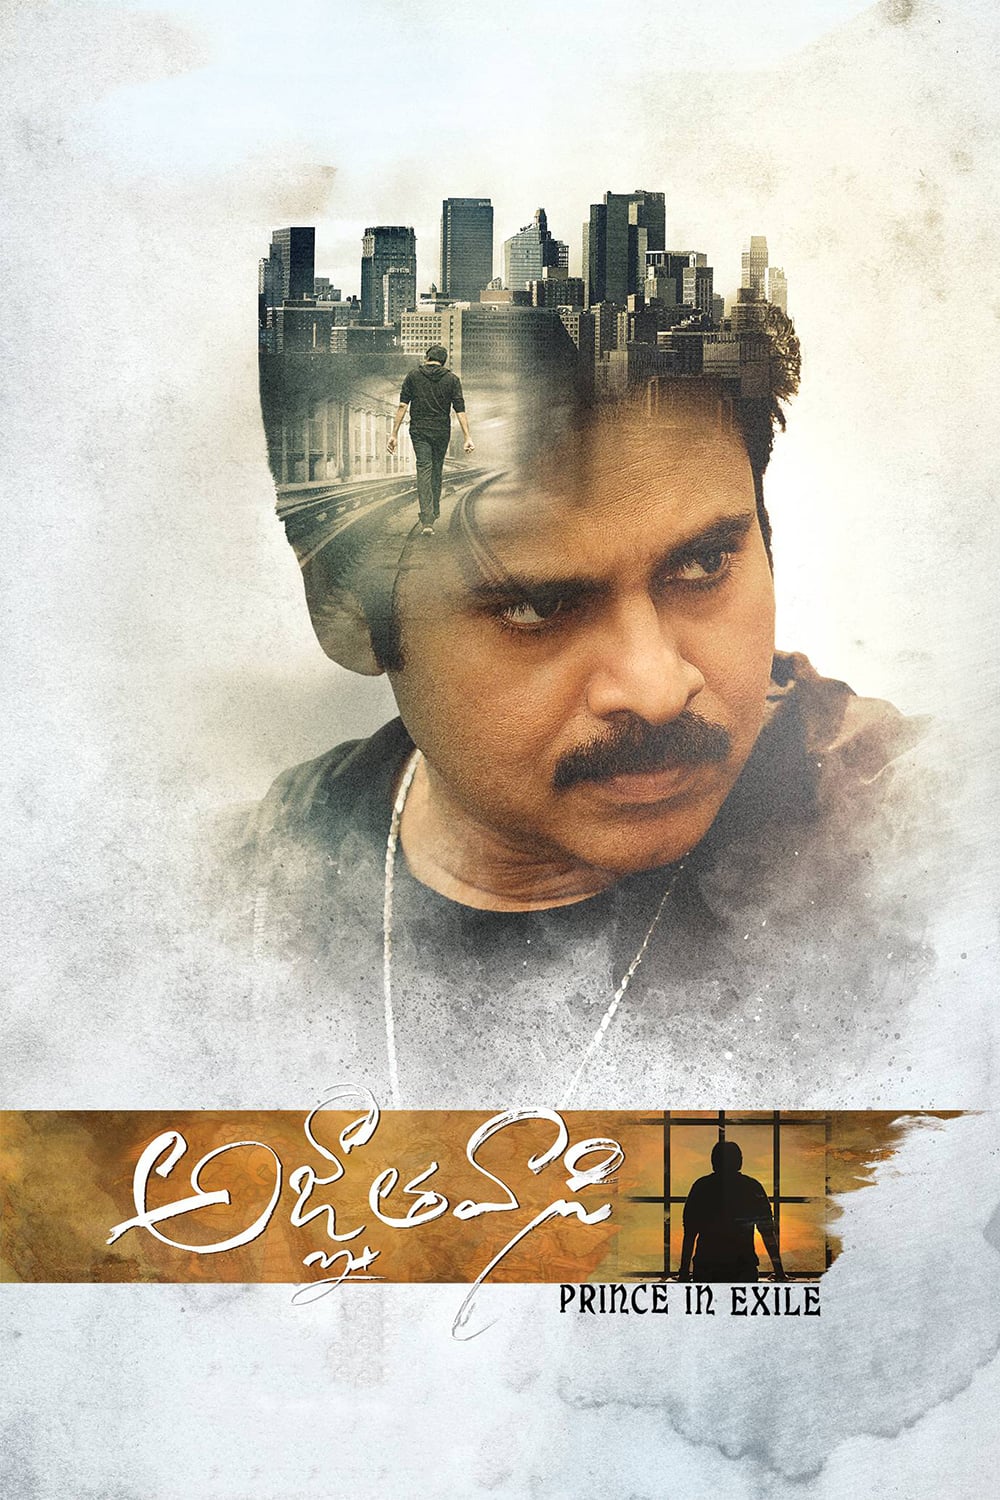 Poster for the movie "Agnyaathavaasi"